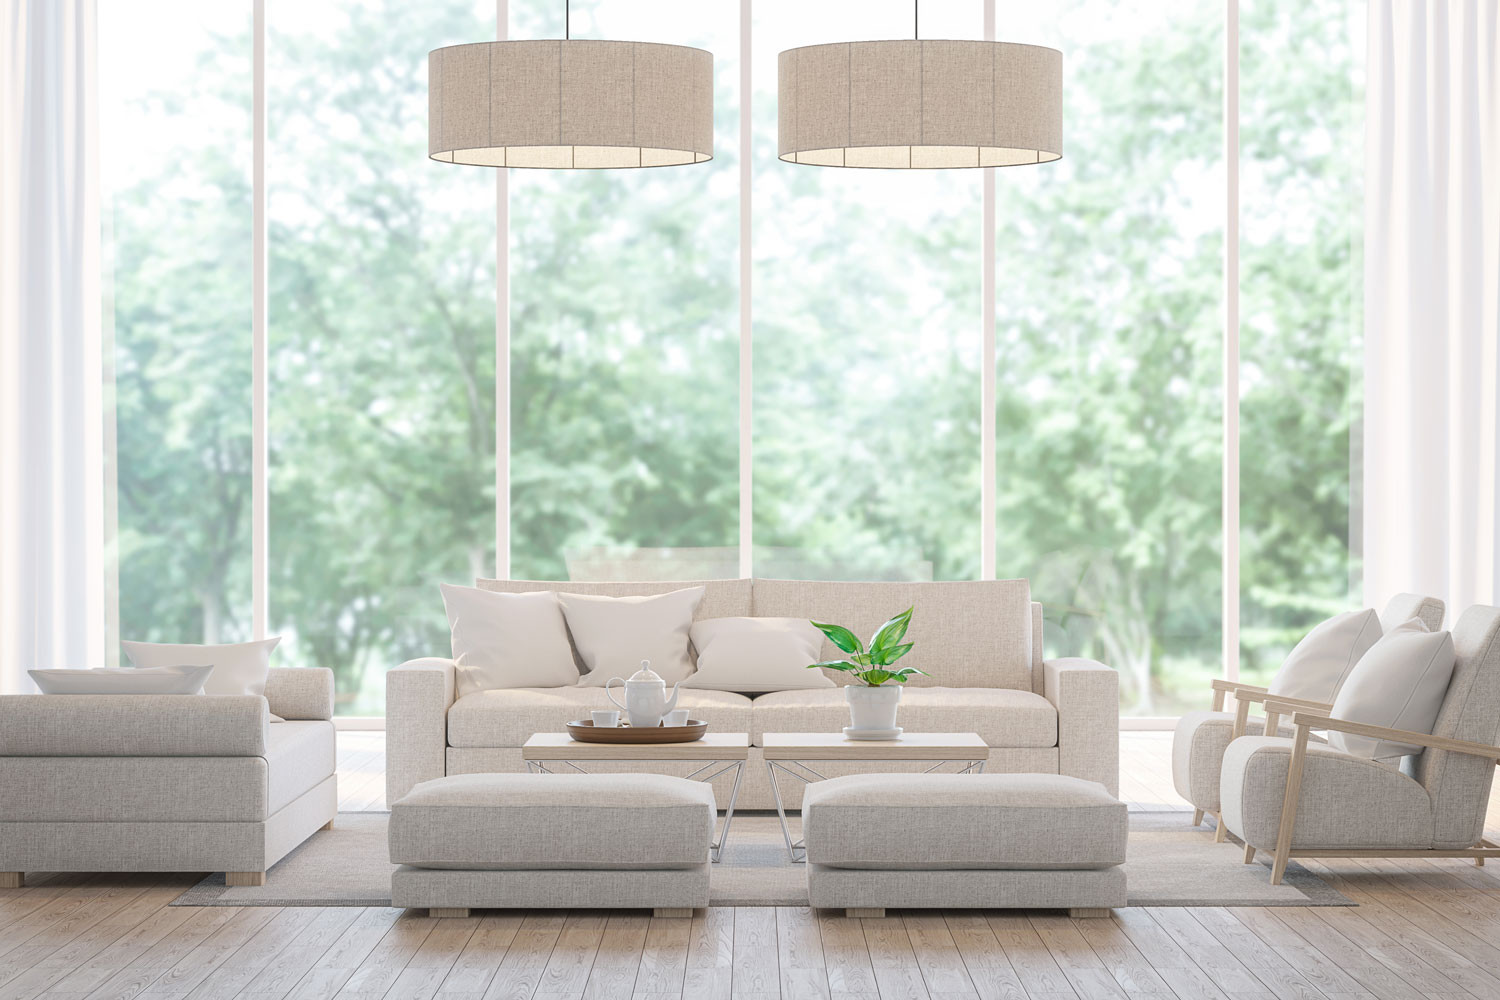 Sectional and modular sofas with square ottomans inside spacious living room with large dangling lamps